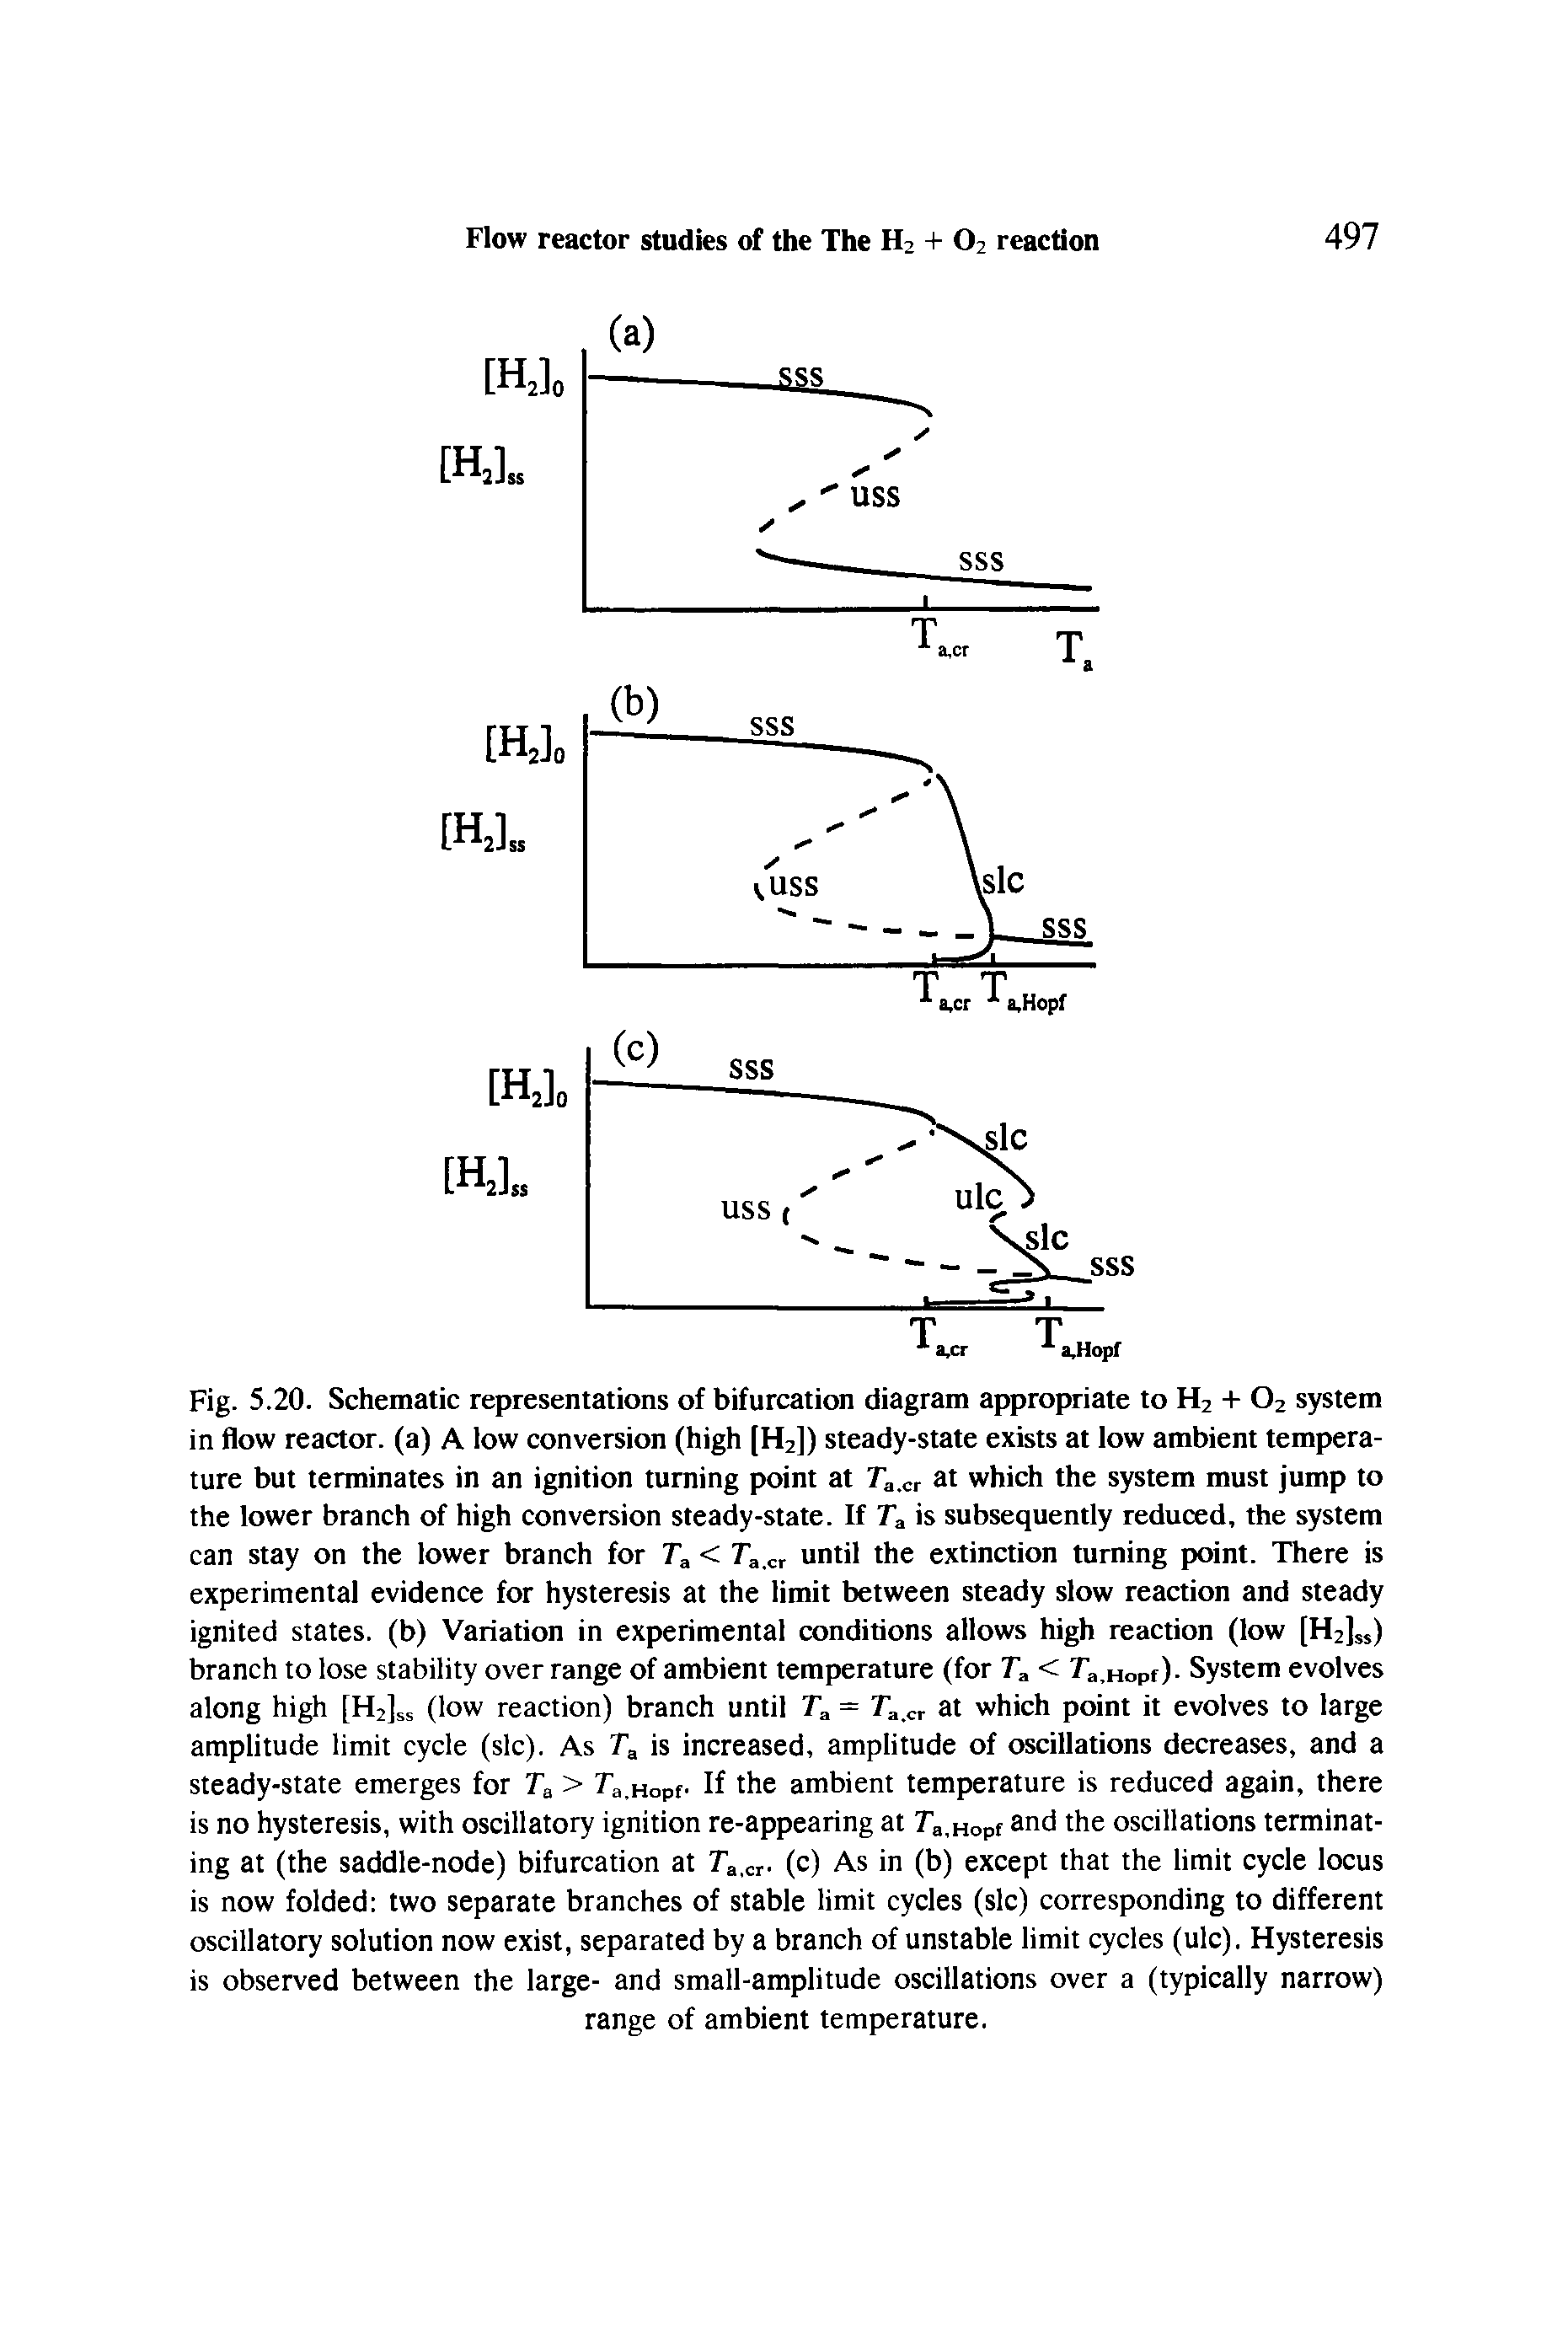 Fig. 5.20. Schematic representations of bifurcation diagram appropriate to H2 + O2 system in flow reactor, (a) A low conversion (high [H2]) steady-state exists at low ambient temperature but terminates in an ignition turning point at Ta.cr at which the system must jump to the lower branch of high conversion steady-state. If Ta is subsequently reduced, the system can stay on the lower branch for until the extinction turning point. There is...